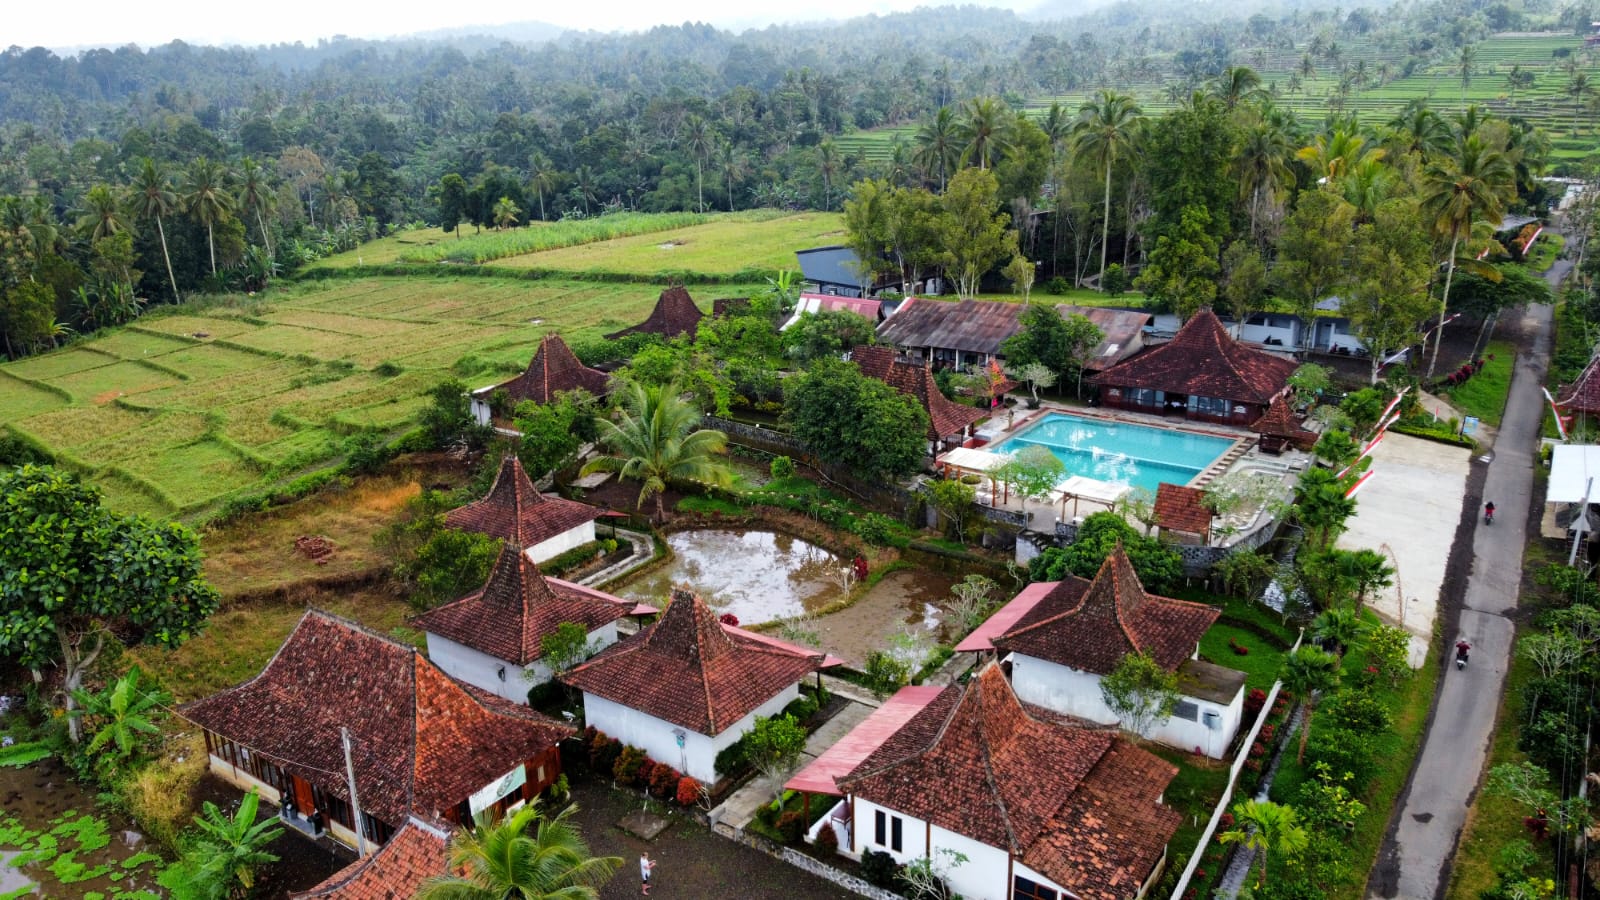 Traditional Villas in the paddy fields